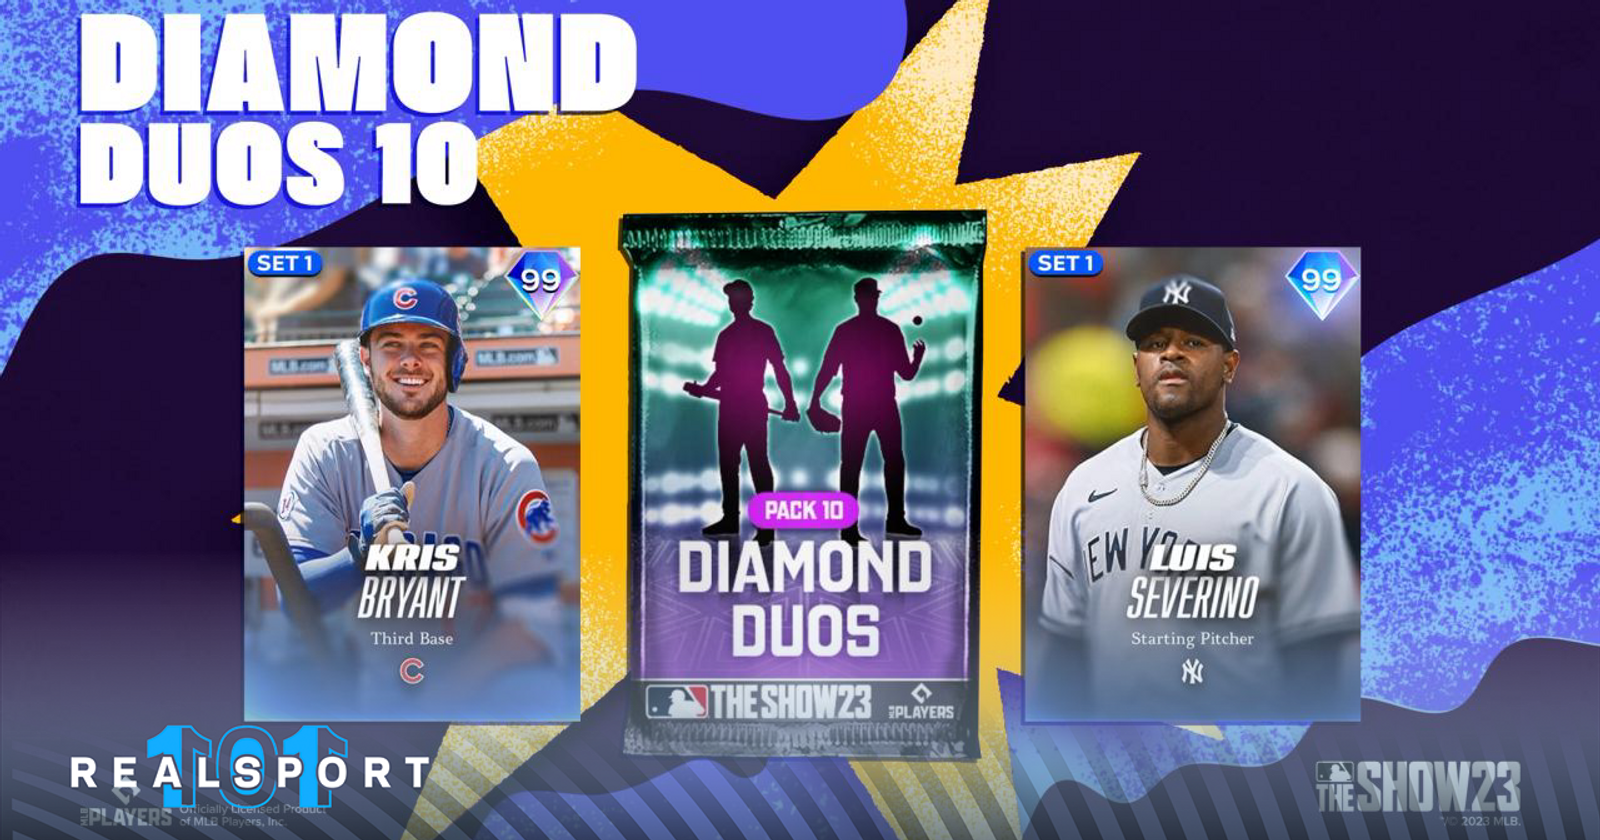 MLB The Show 23 Diamond Duos 10 pack has arrived